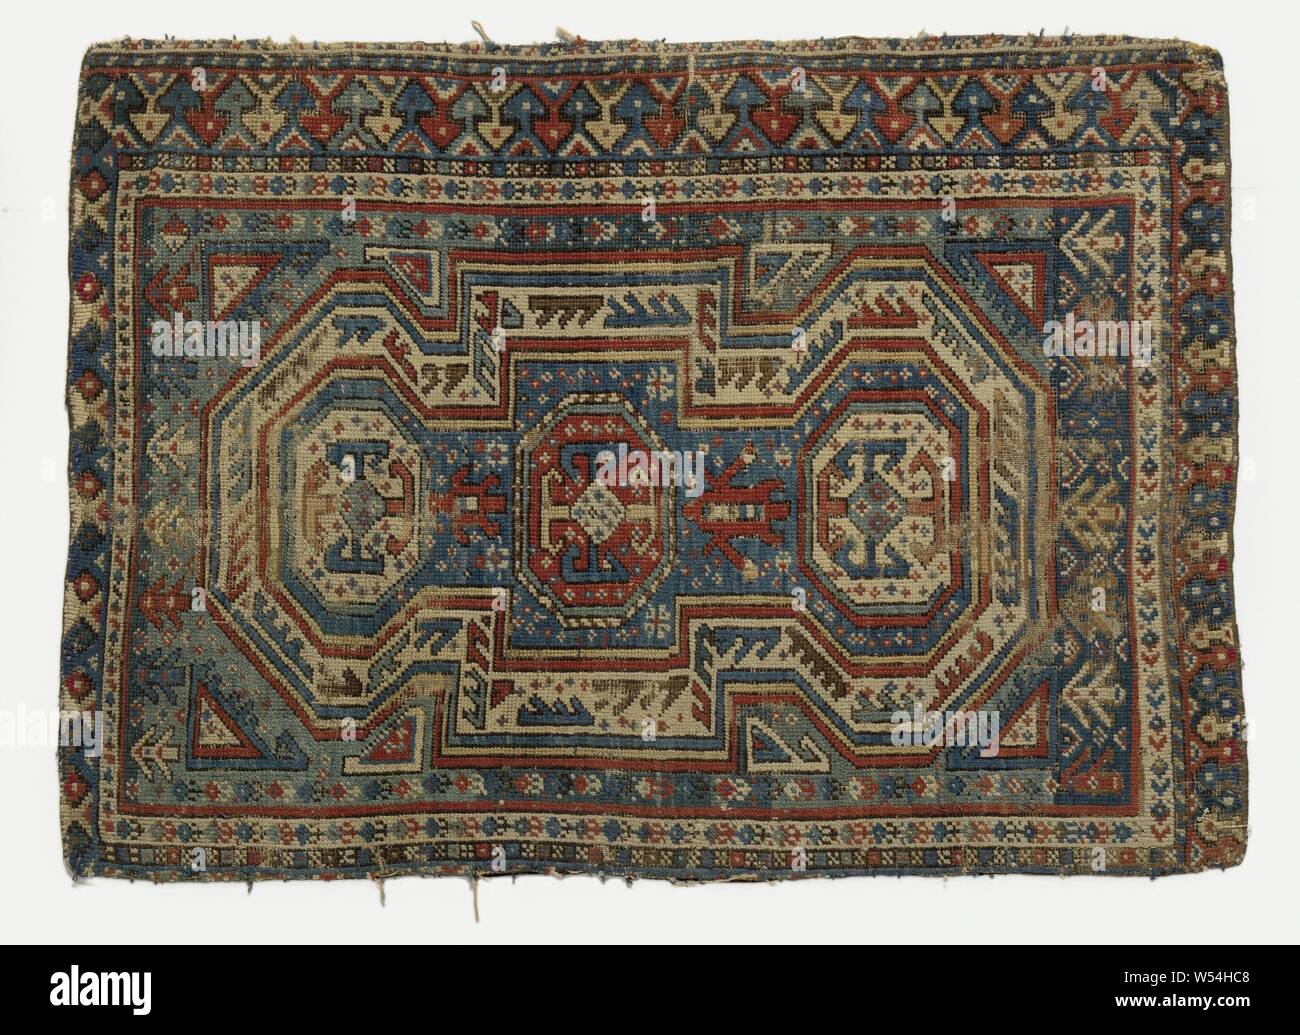 Oriental carpet, presumably prayer rug, made of knotted wool, decorated with a double mihrab with high top facades. Three edges with two seams., anonymous, Shirvan (possibly), c. 1800, wool, h 108 cm × w 78 cm Stock Photo